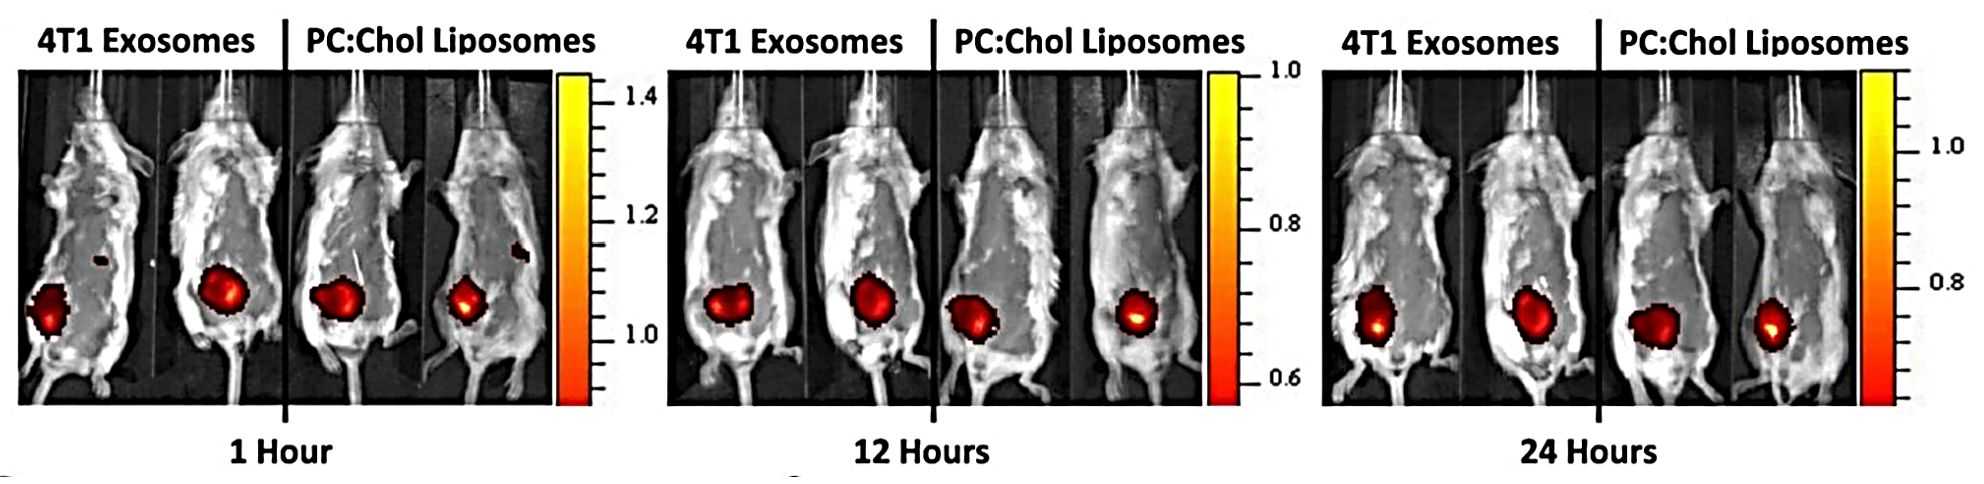 Figure 2. Schematic of DIR-labeled exosomes and liposomes injected intratumorally.